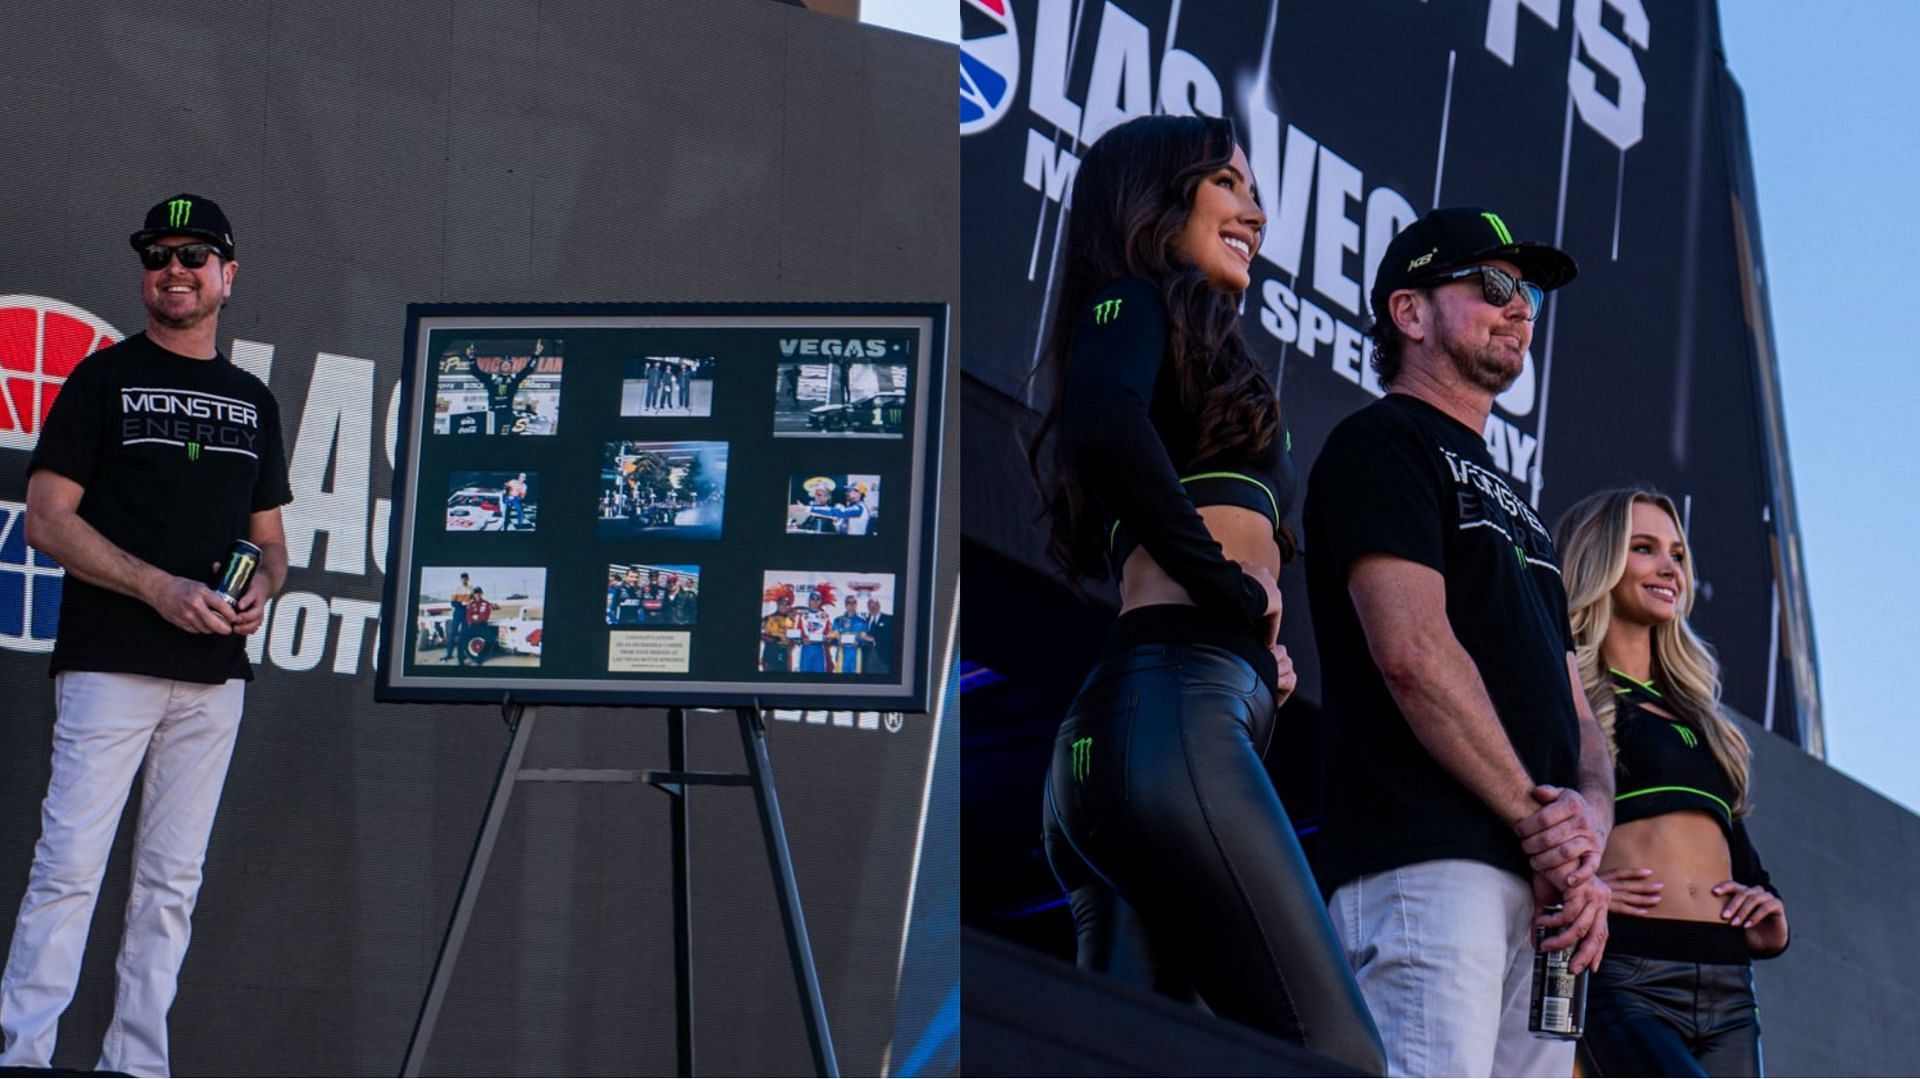 Kurt Busch receiving a special gift from the Las Vegas Motor Speedway prior to the NASCAR Cup Series South Point 400 race